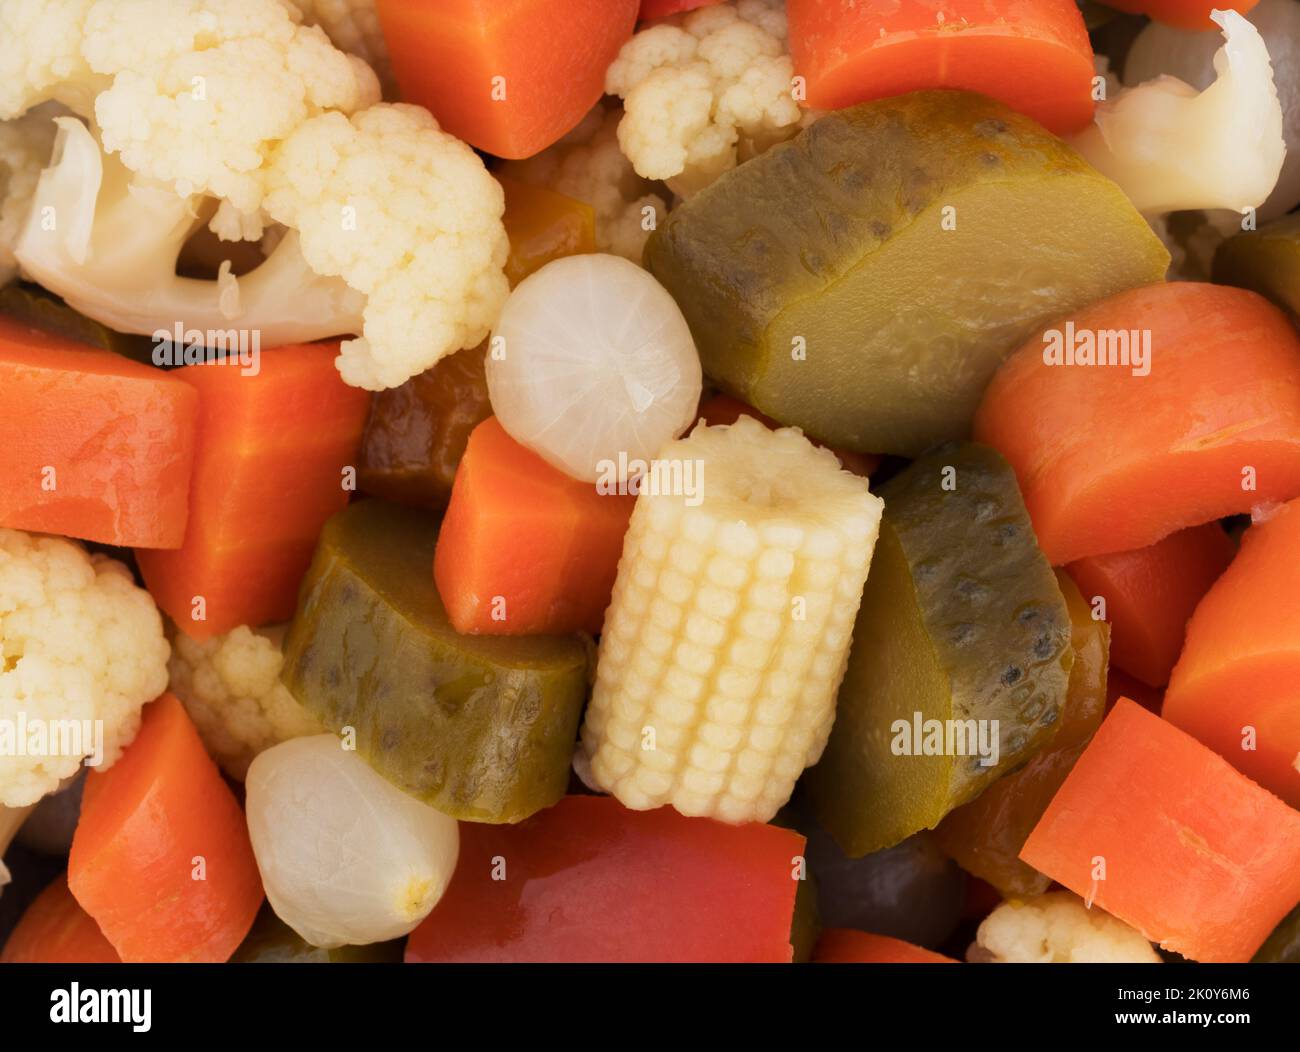 Very close view of assorted giardiniera pickled vegetables. Stock Photo